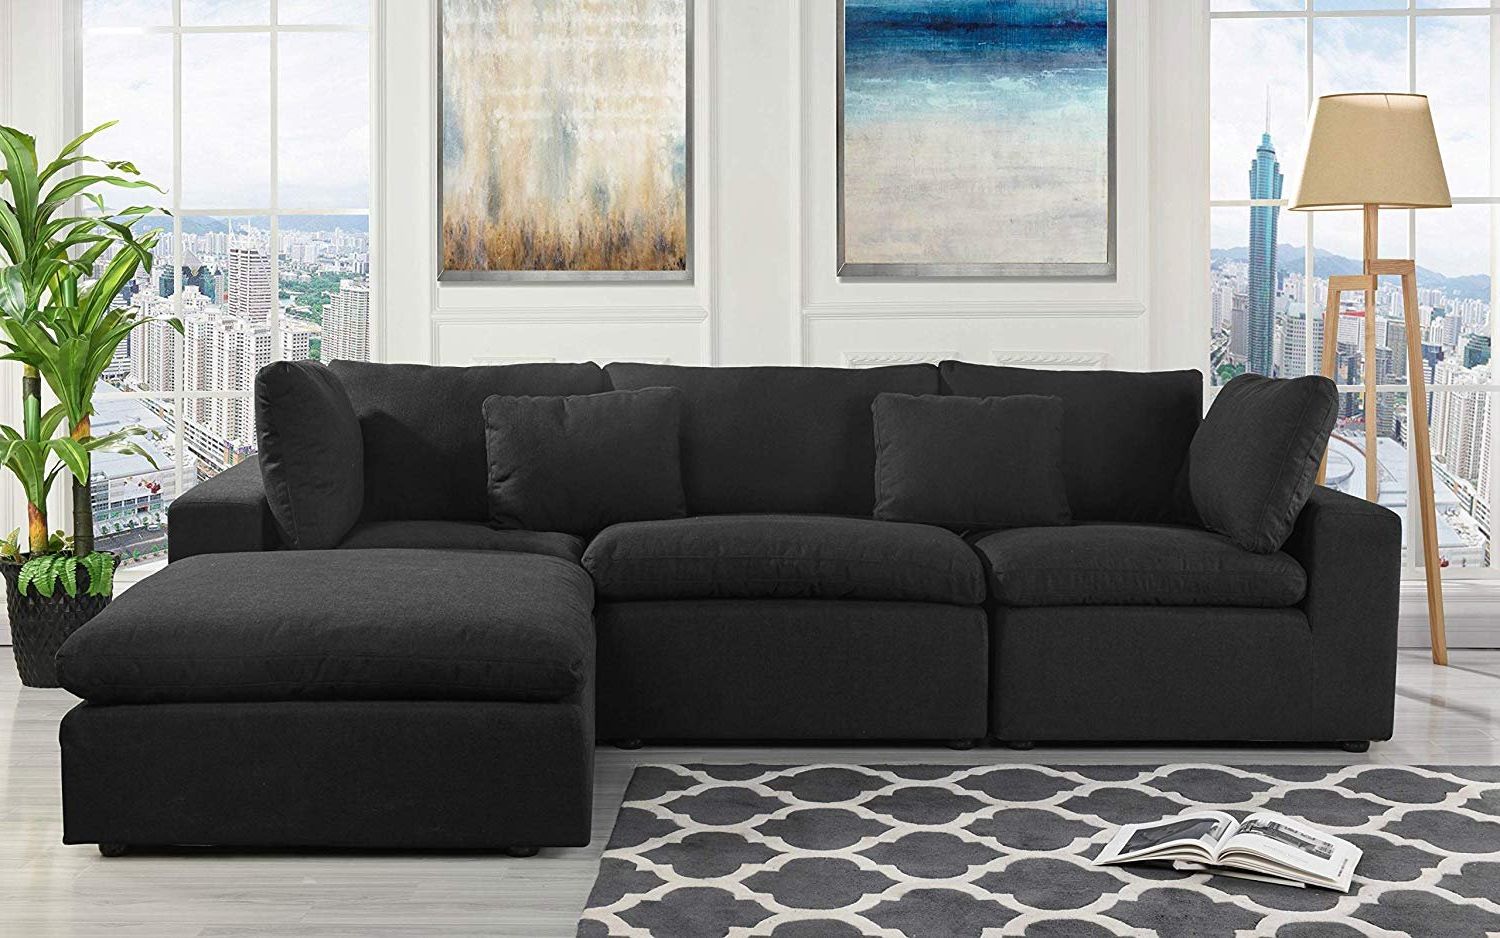 Classic Large Black Fabric Sectional Sofa, L Shape Couch With Wide Intended For Newest Traditional Black Fabric Sofas (View 4 of 15)